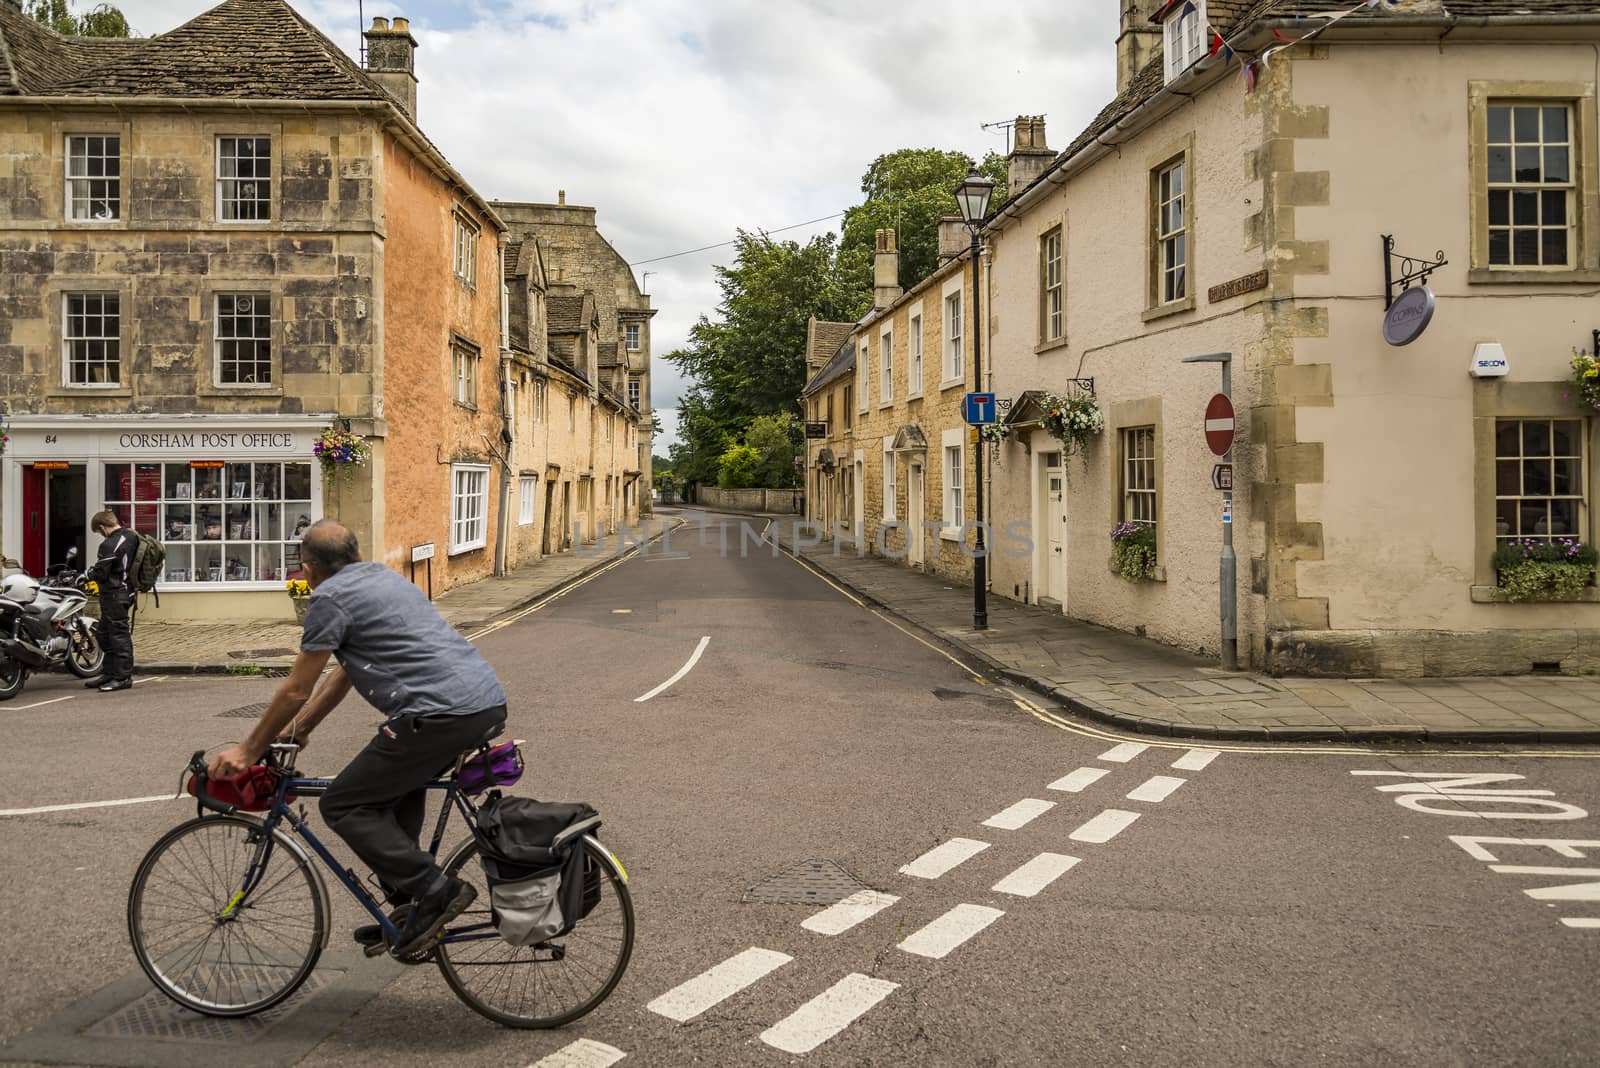 CORSHAM, UK: a person rides his bike in a street in Corsham, an old village in south of England on July, 17, 2015 in Corsham, UK